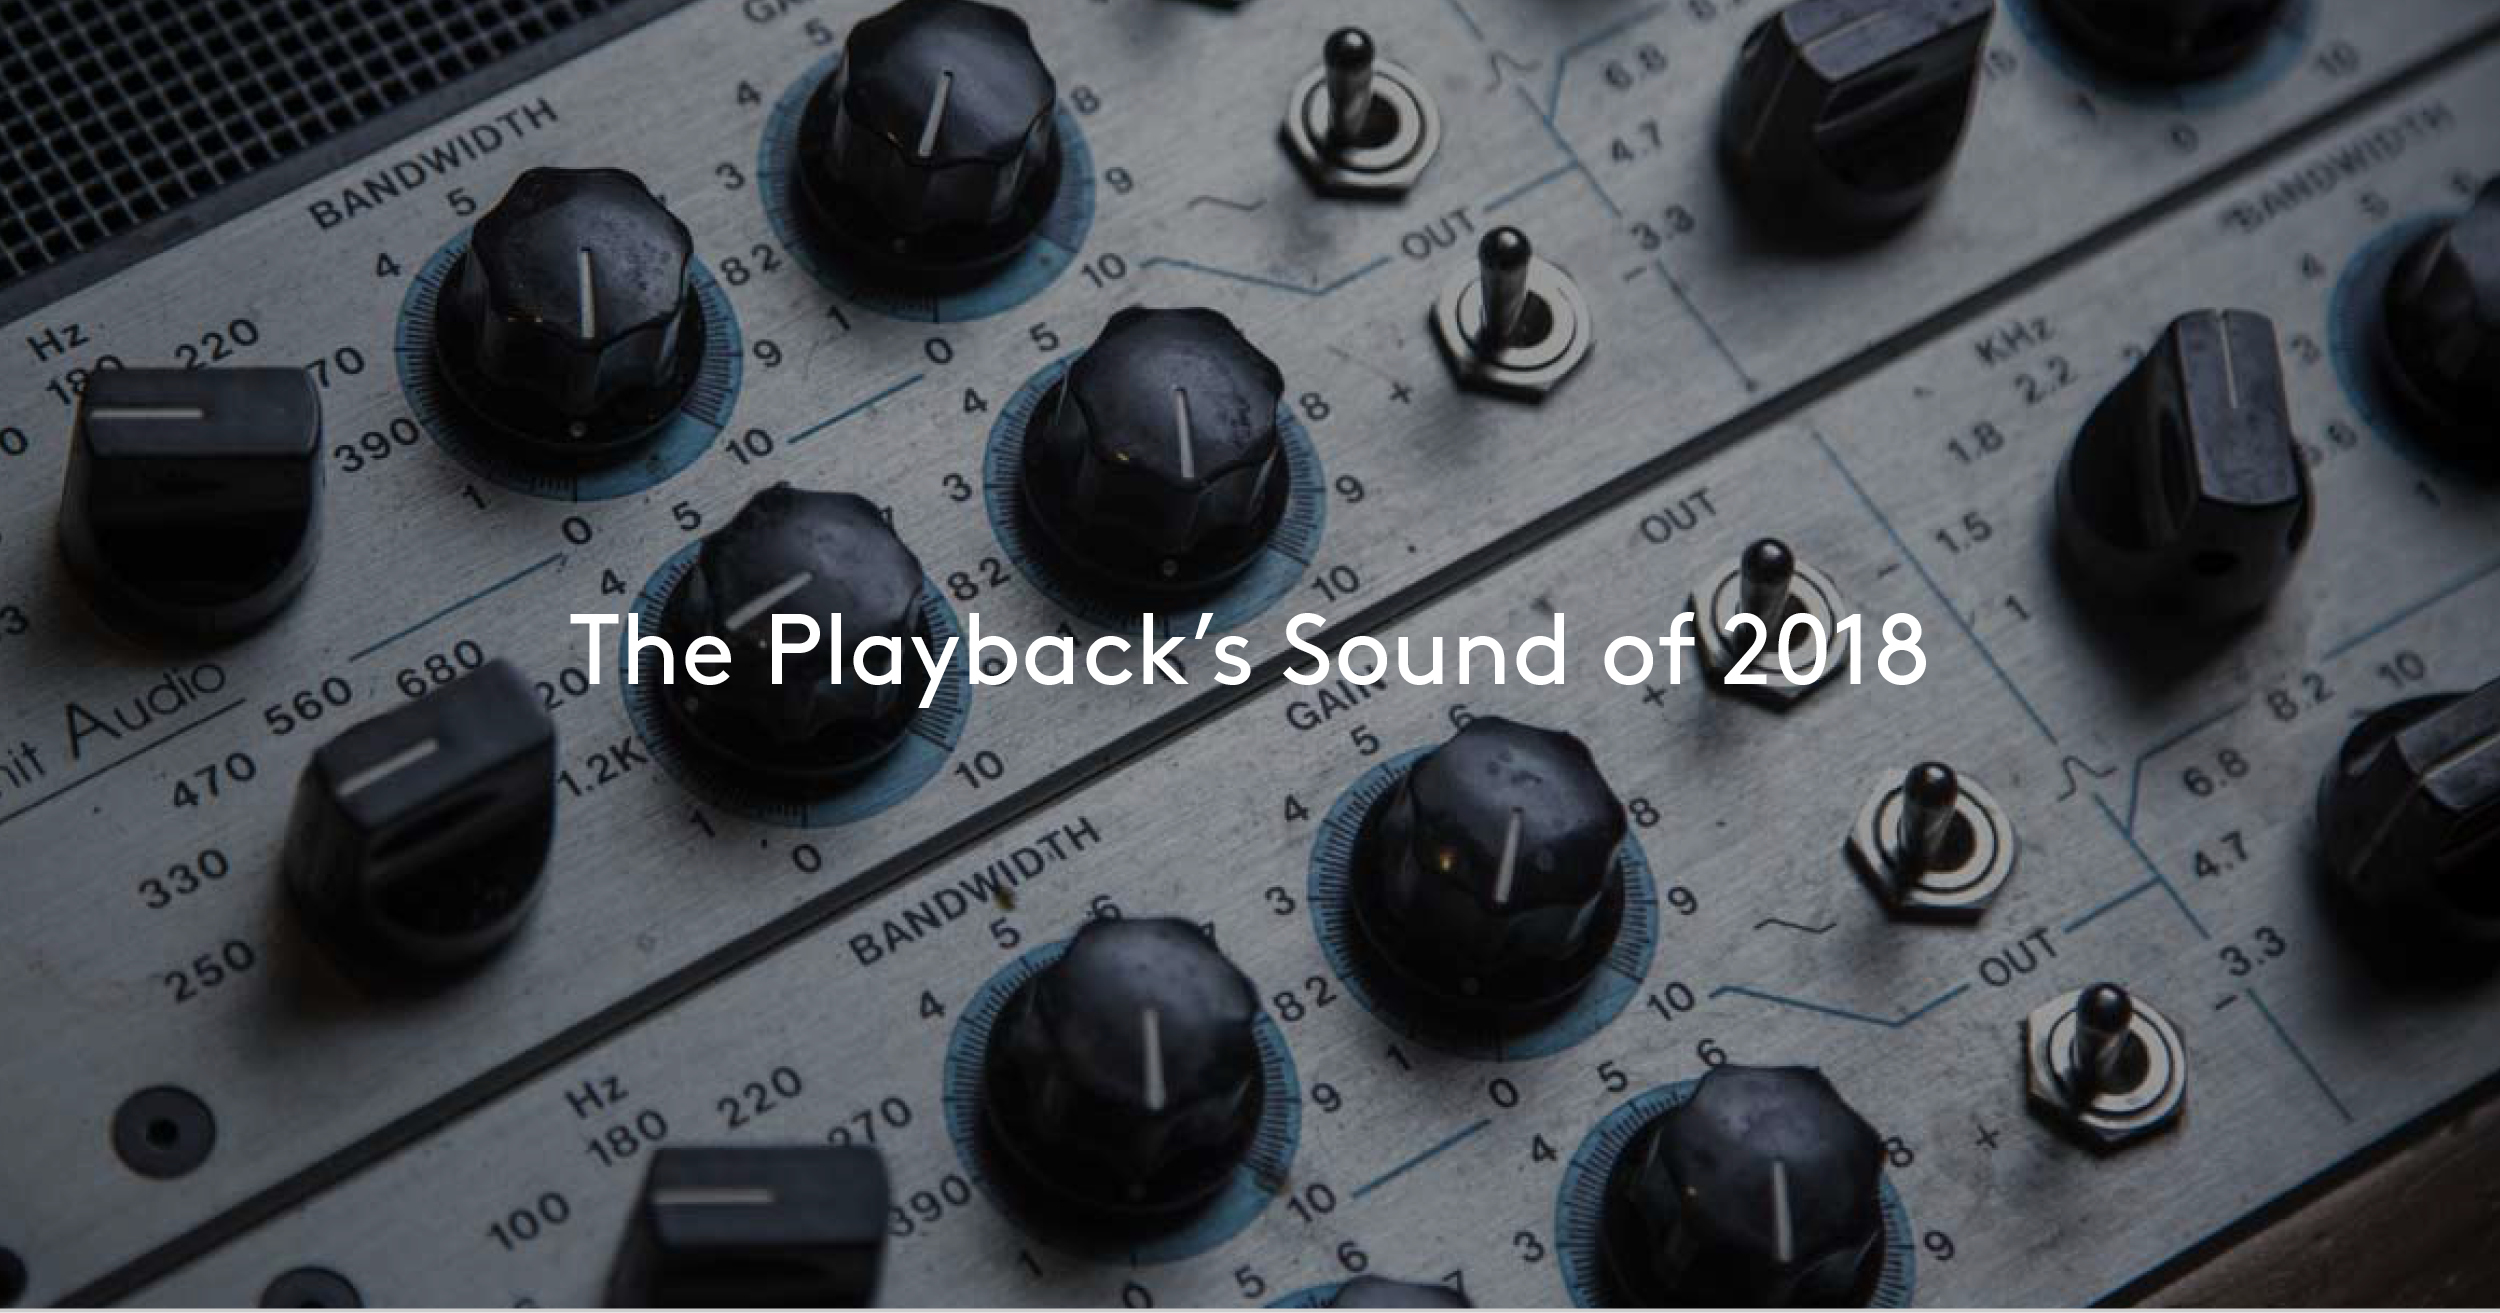 The Playback Sound of 2018